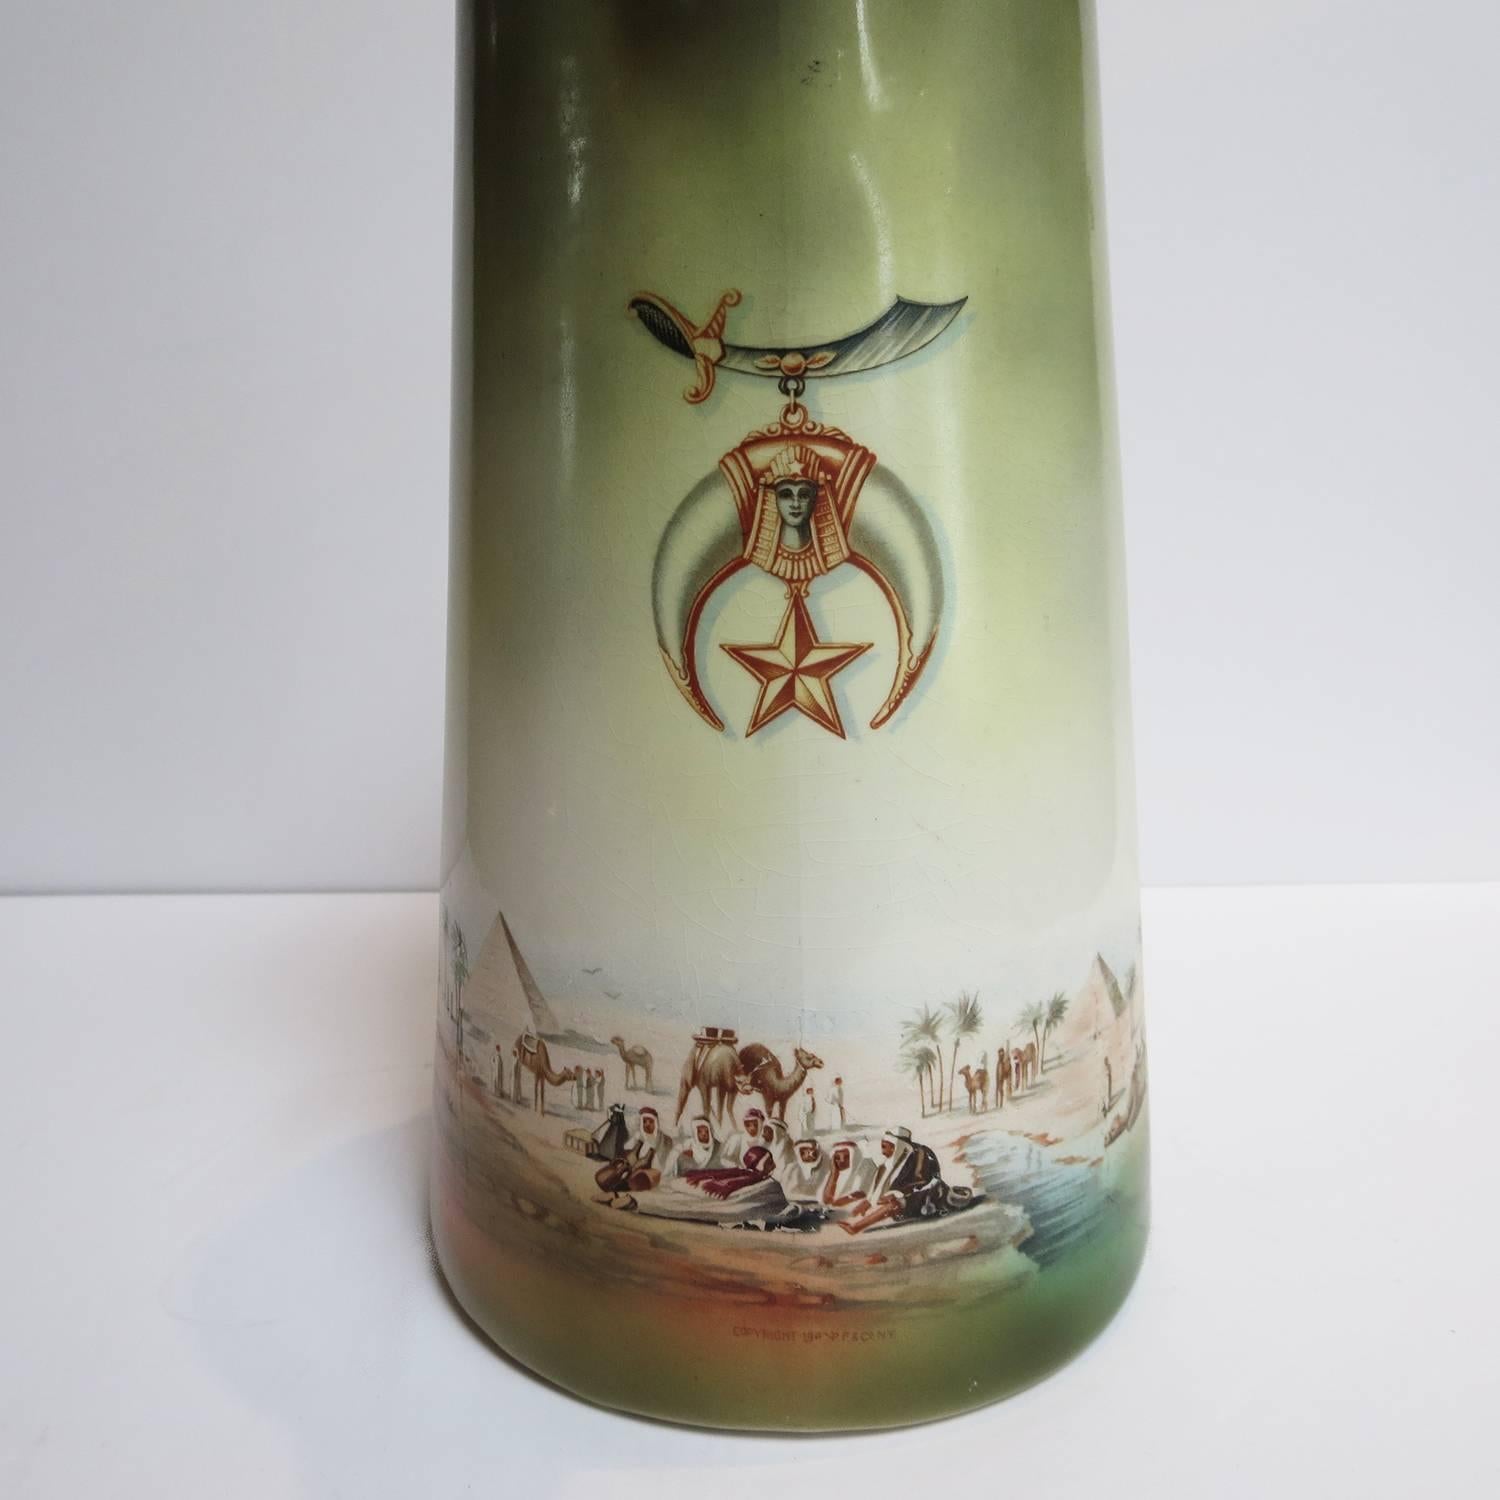 Tuesday night Shriners meetings can certainly build a thirst! What better way to quench it than this lovely Egyptian themed painted pitcher? It is beautifully painted, and copyrights from 1900 PF & Co. NY are in tiny letters on the front. The